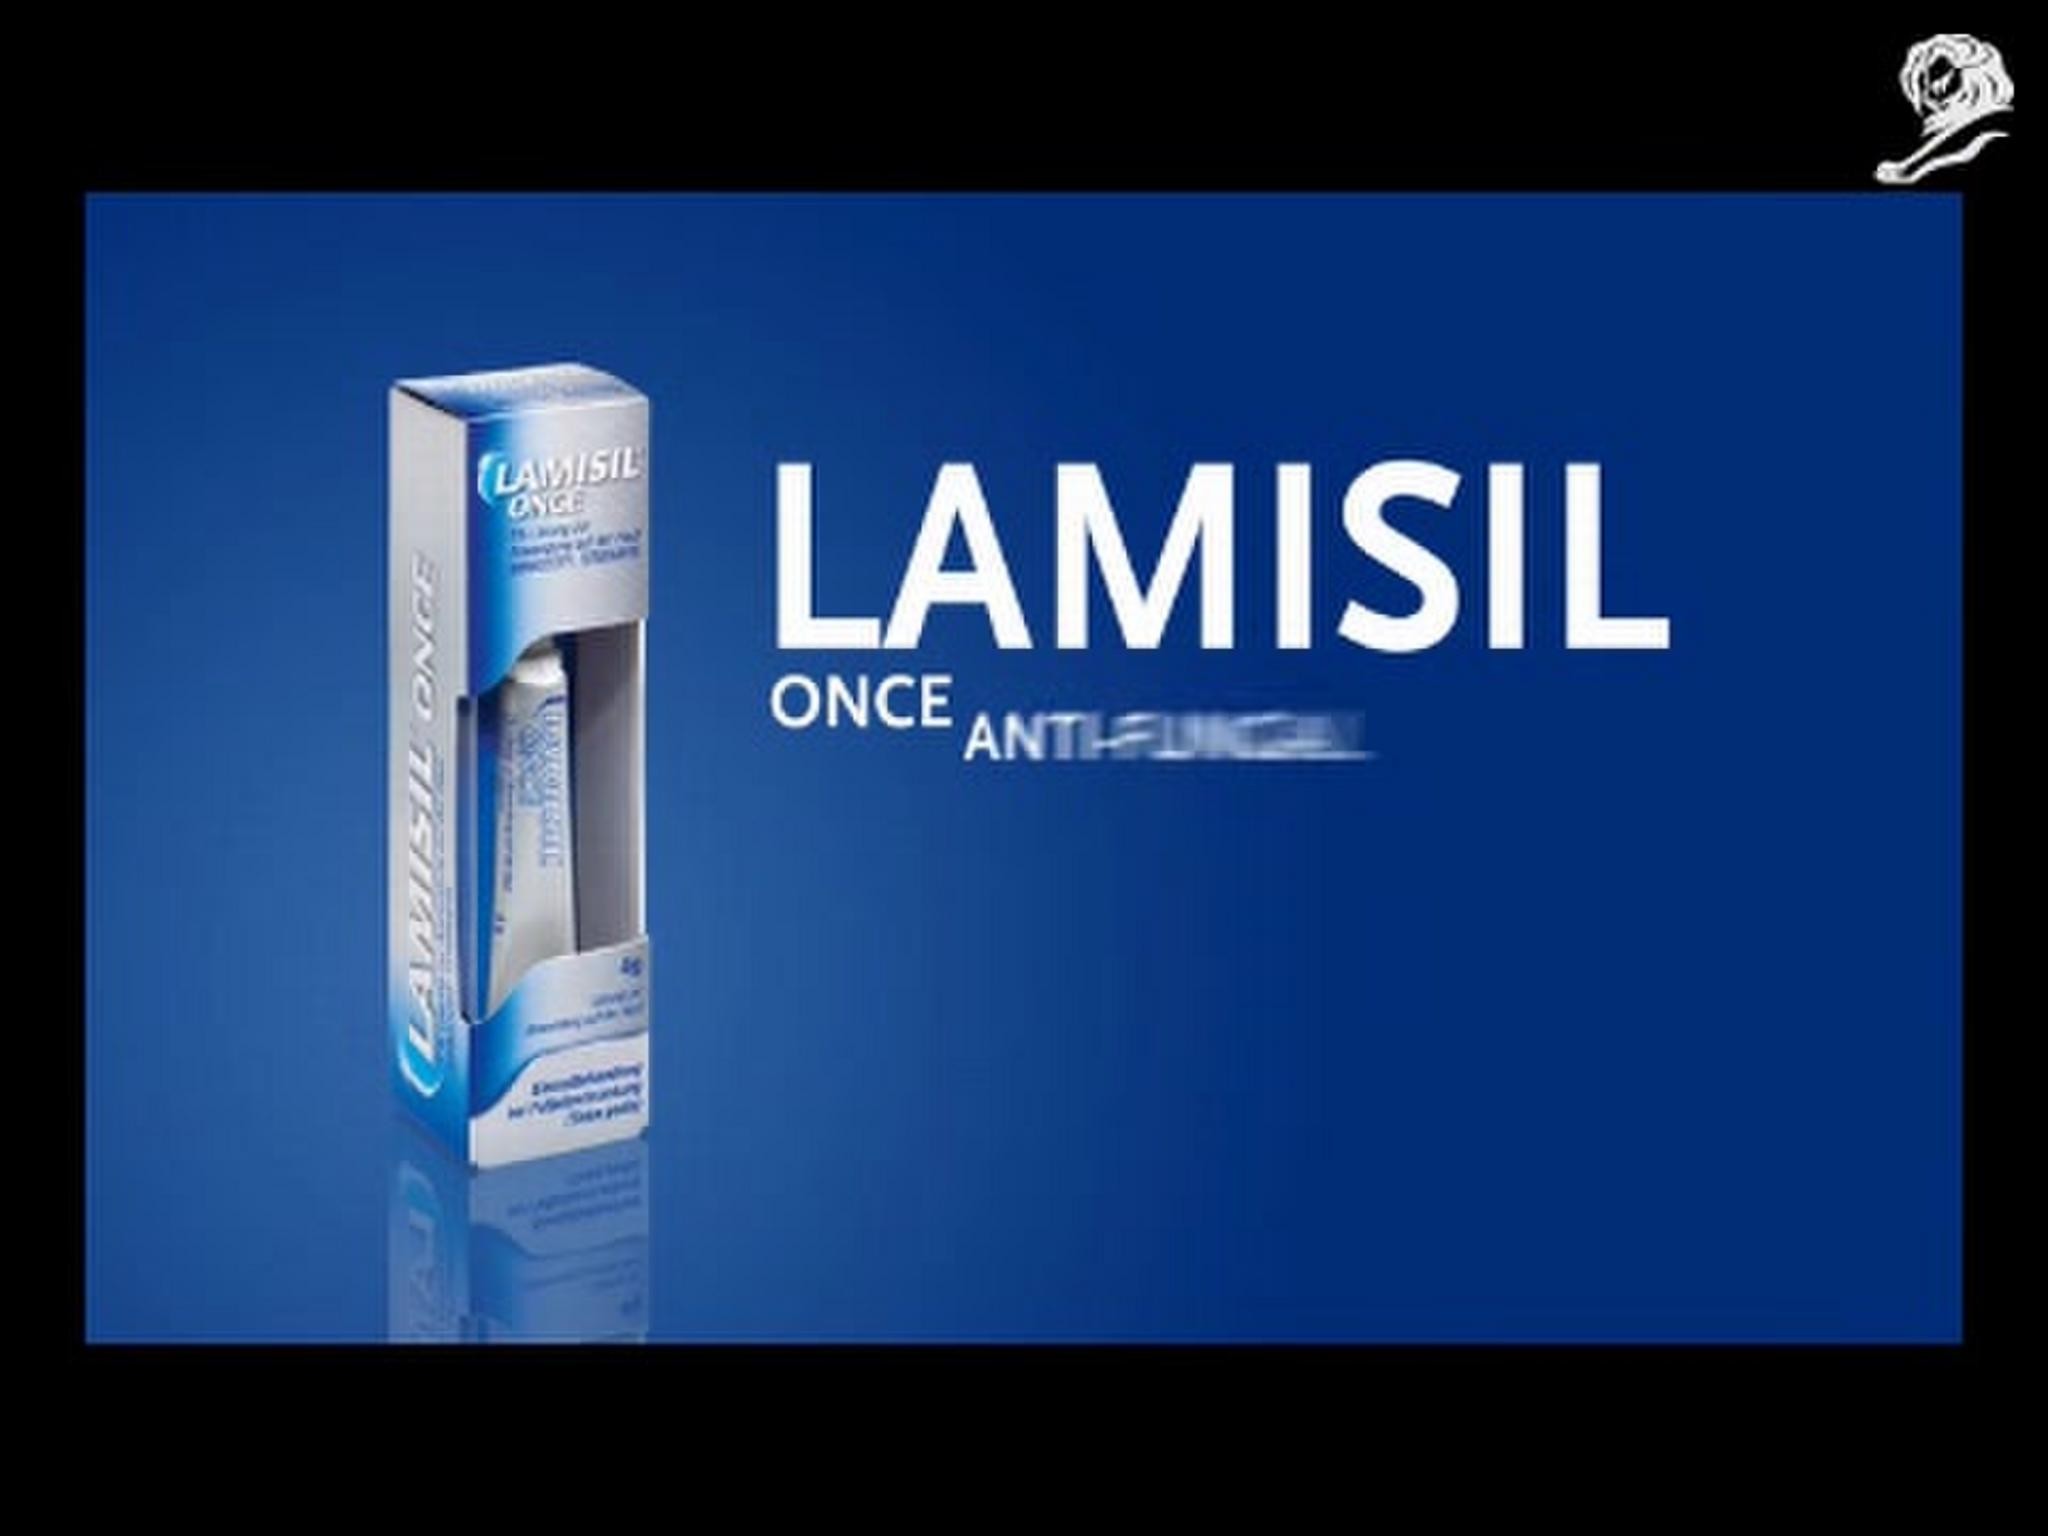 LAMISIL ONCE